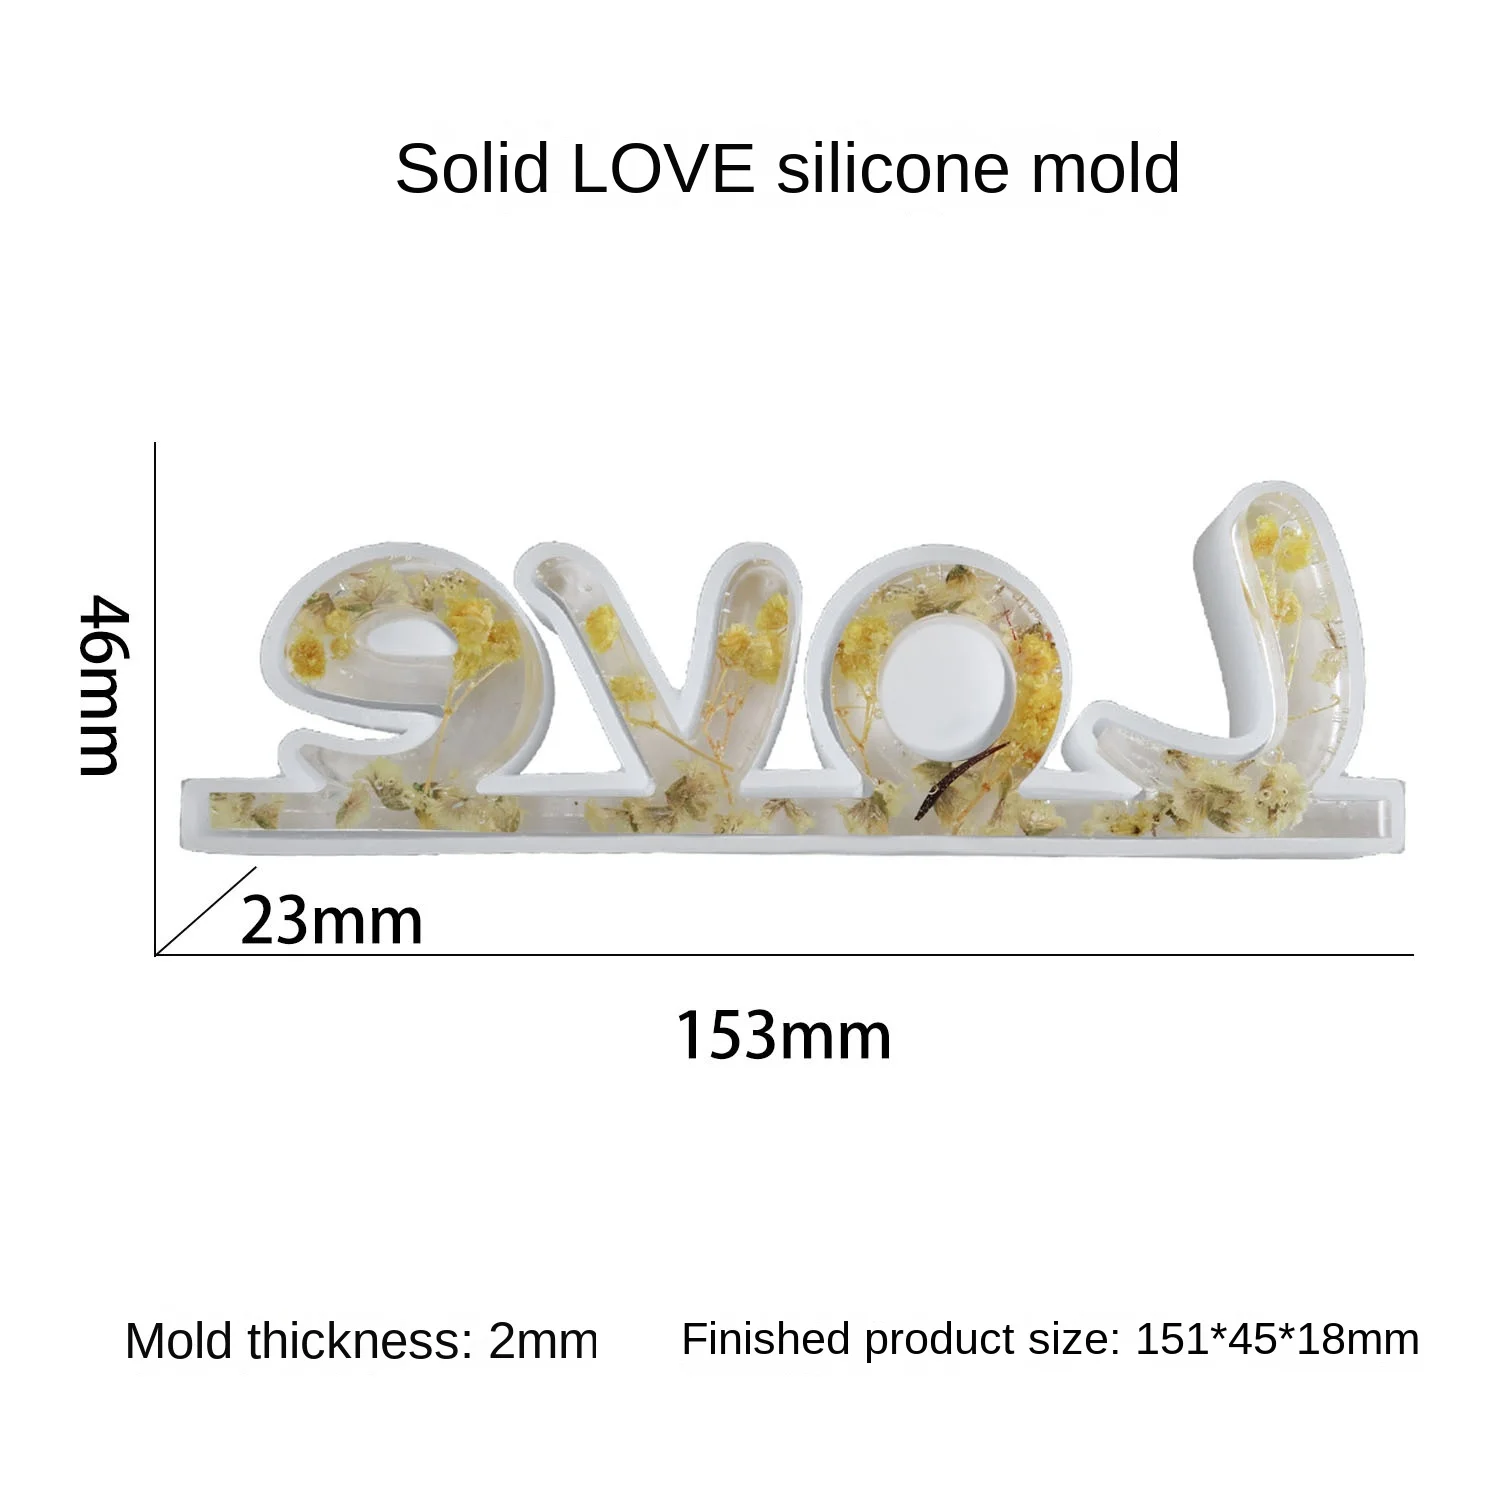 

Love kiss shaped three-dimensional silicone mold made of epoxy resin can be used for decorative items Valentine's Day gifts